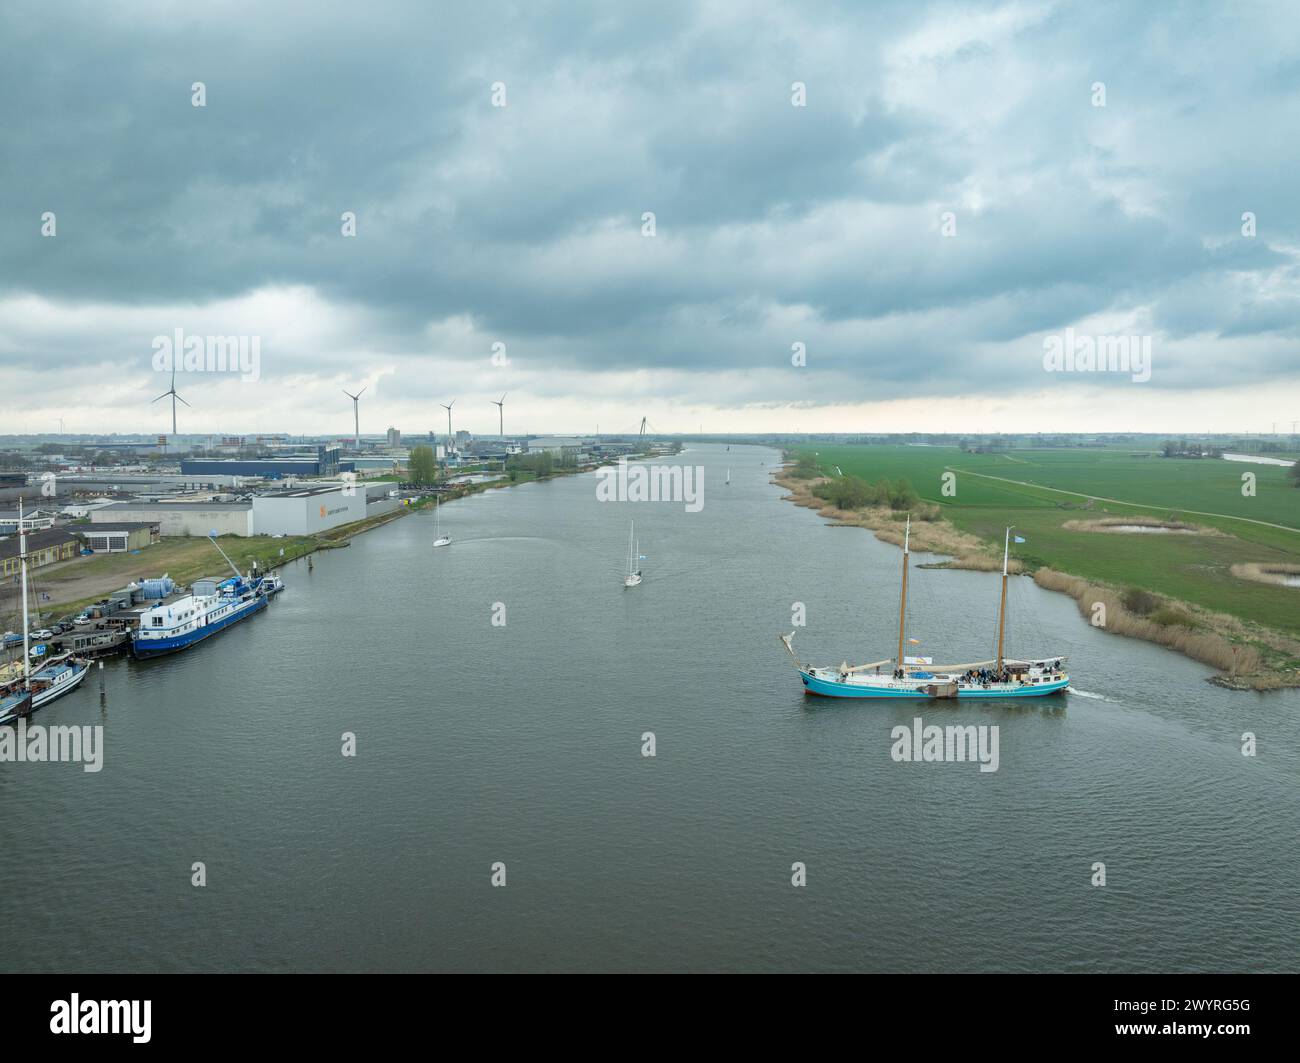 KAMPEN, NETHERLANDS - MARCH 30, 2024: Utopia clipper sail boat making a turn on the IJssel river. The ship is built in 1903 and has a length of 42 m. Stock Photo